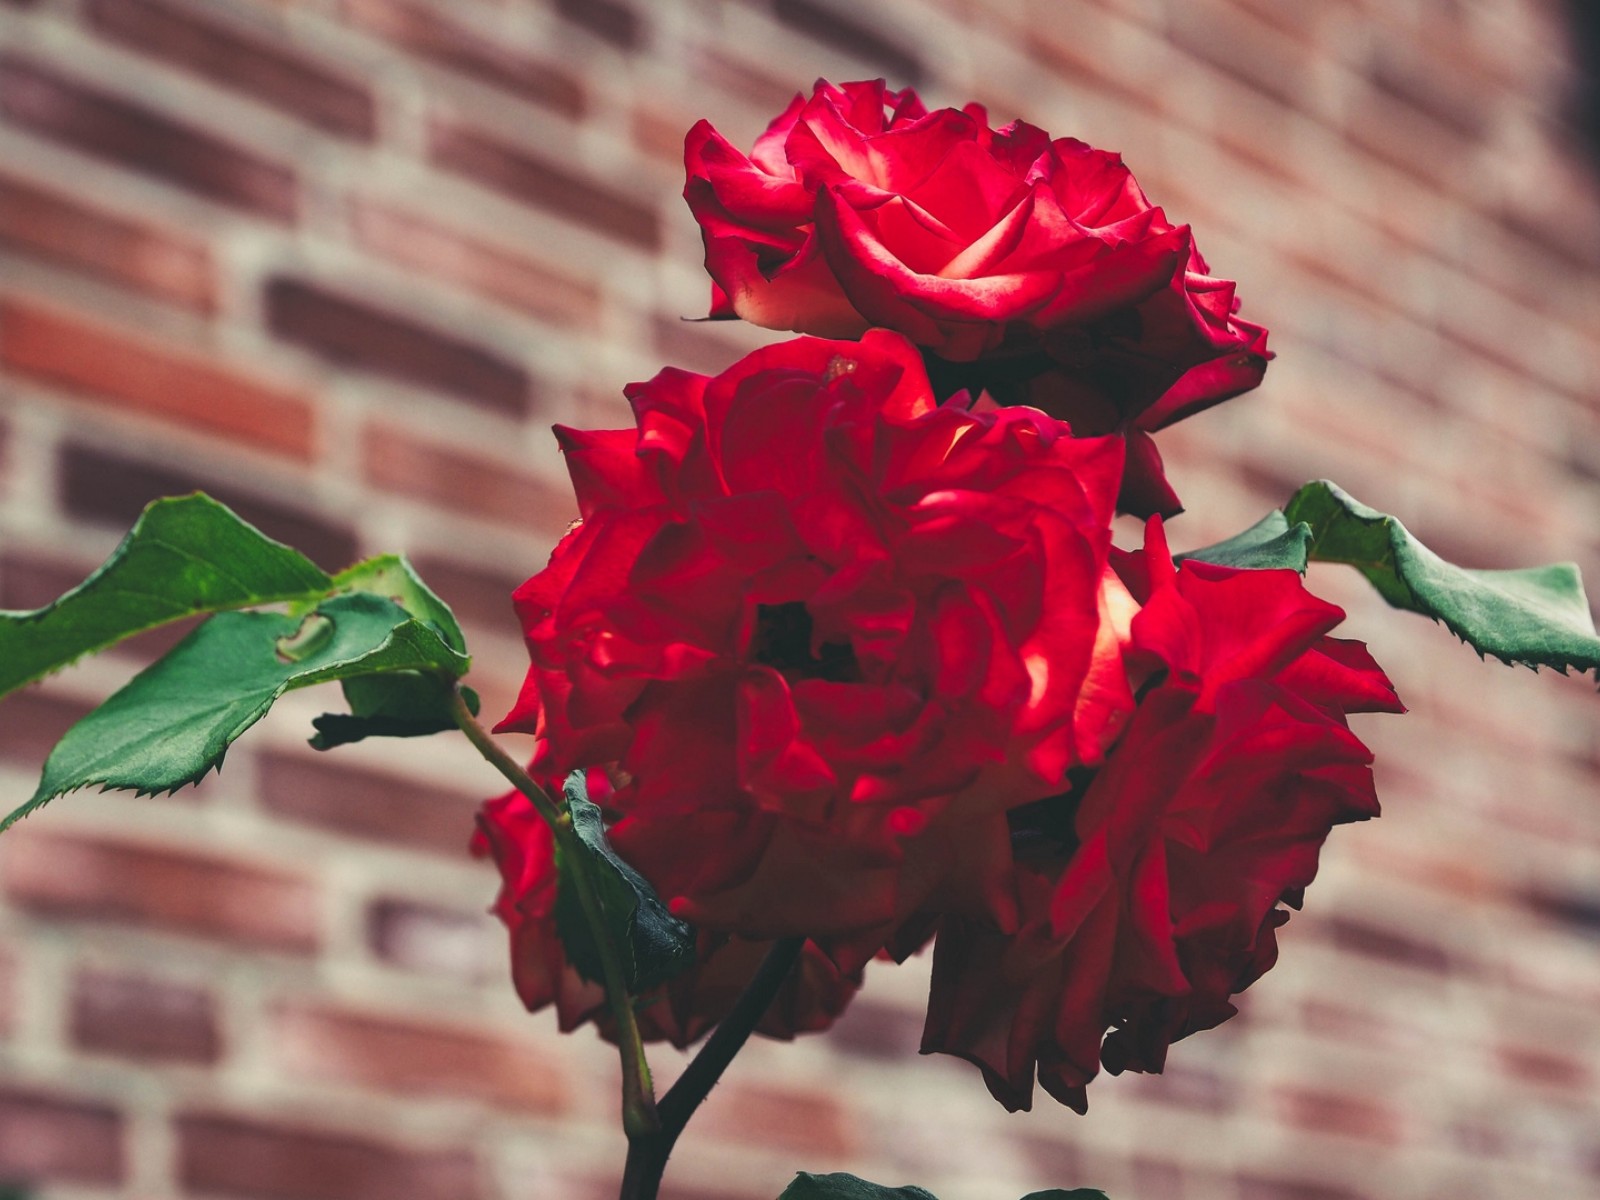 Red Roses Blurry - HD Wallpaper 